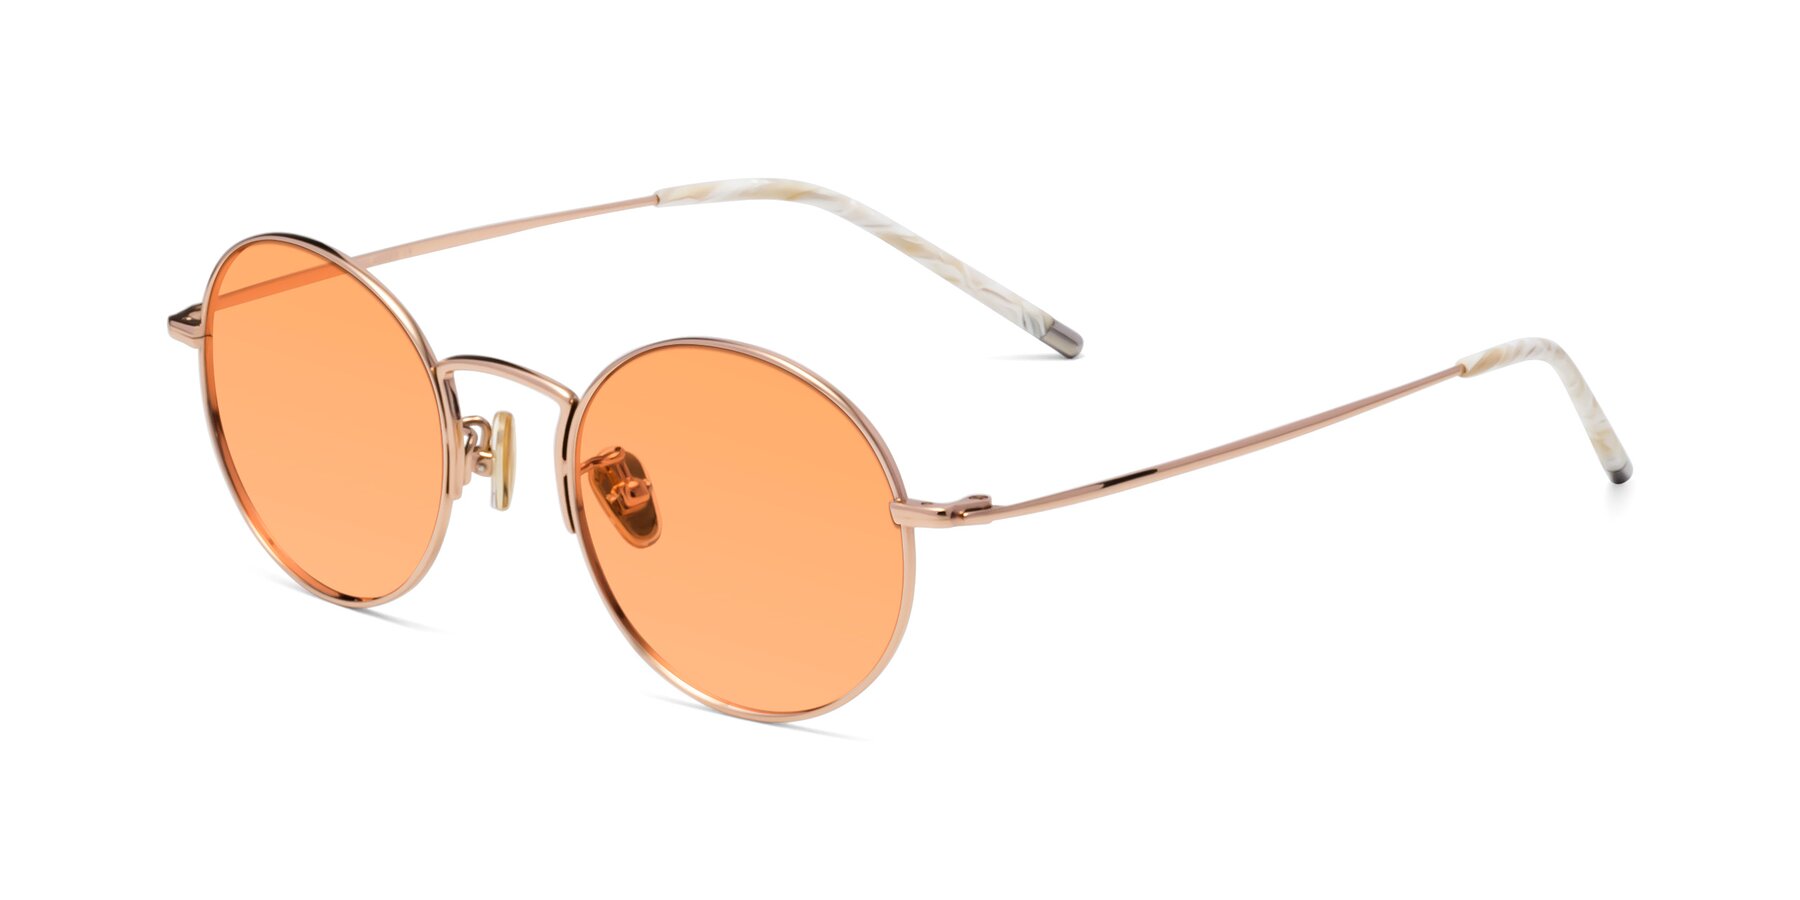 Angle of 80033 in Rose Gold with Medium Orange Tinted Lenses